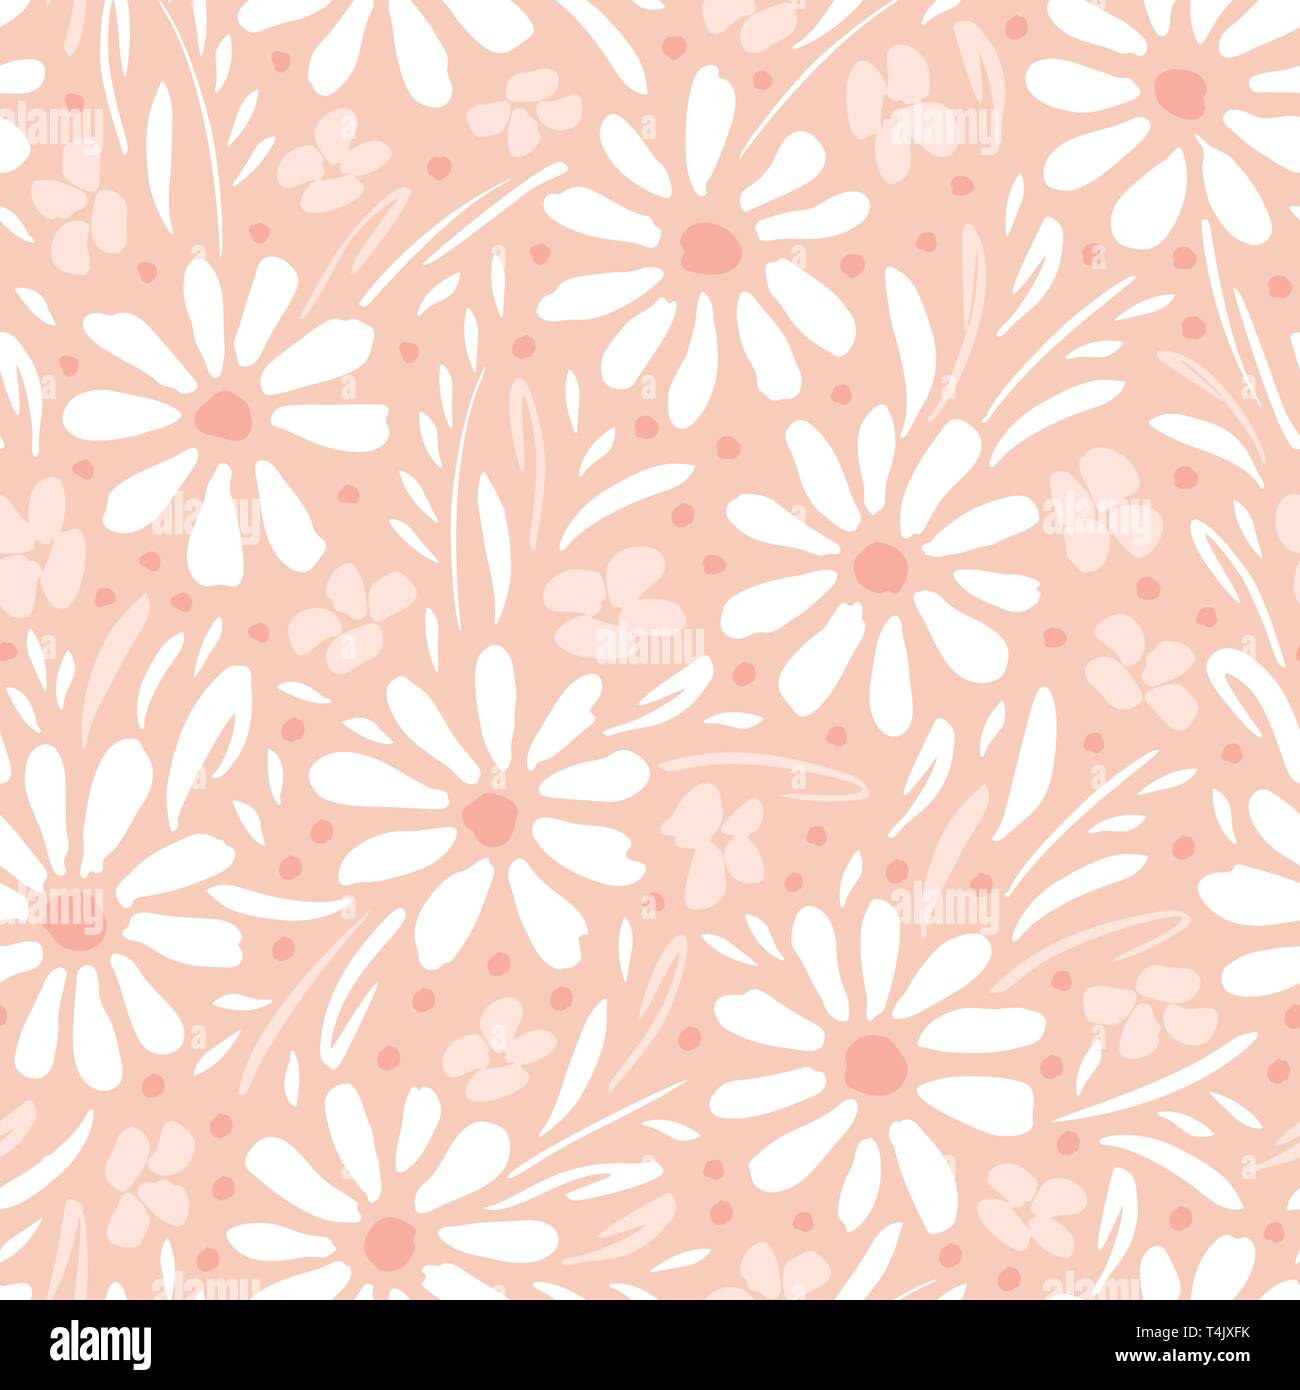 Monochrome hand-painted daisies and foliage on peach pink